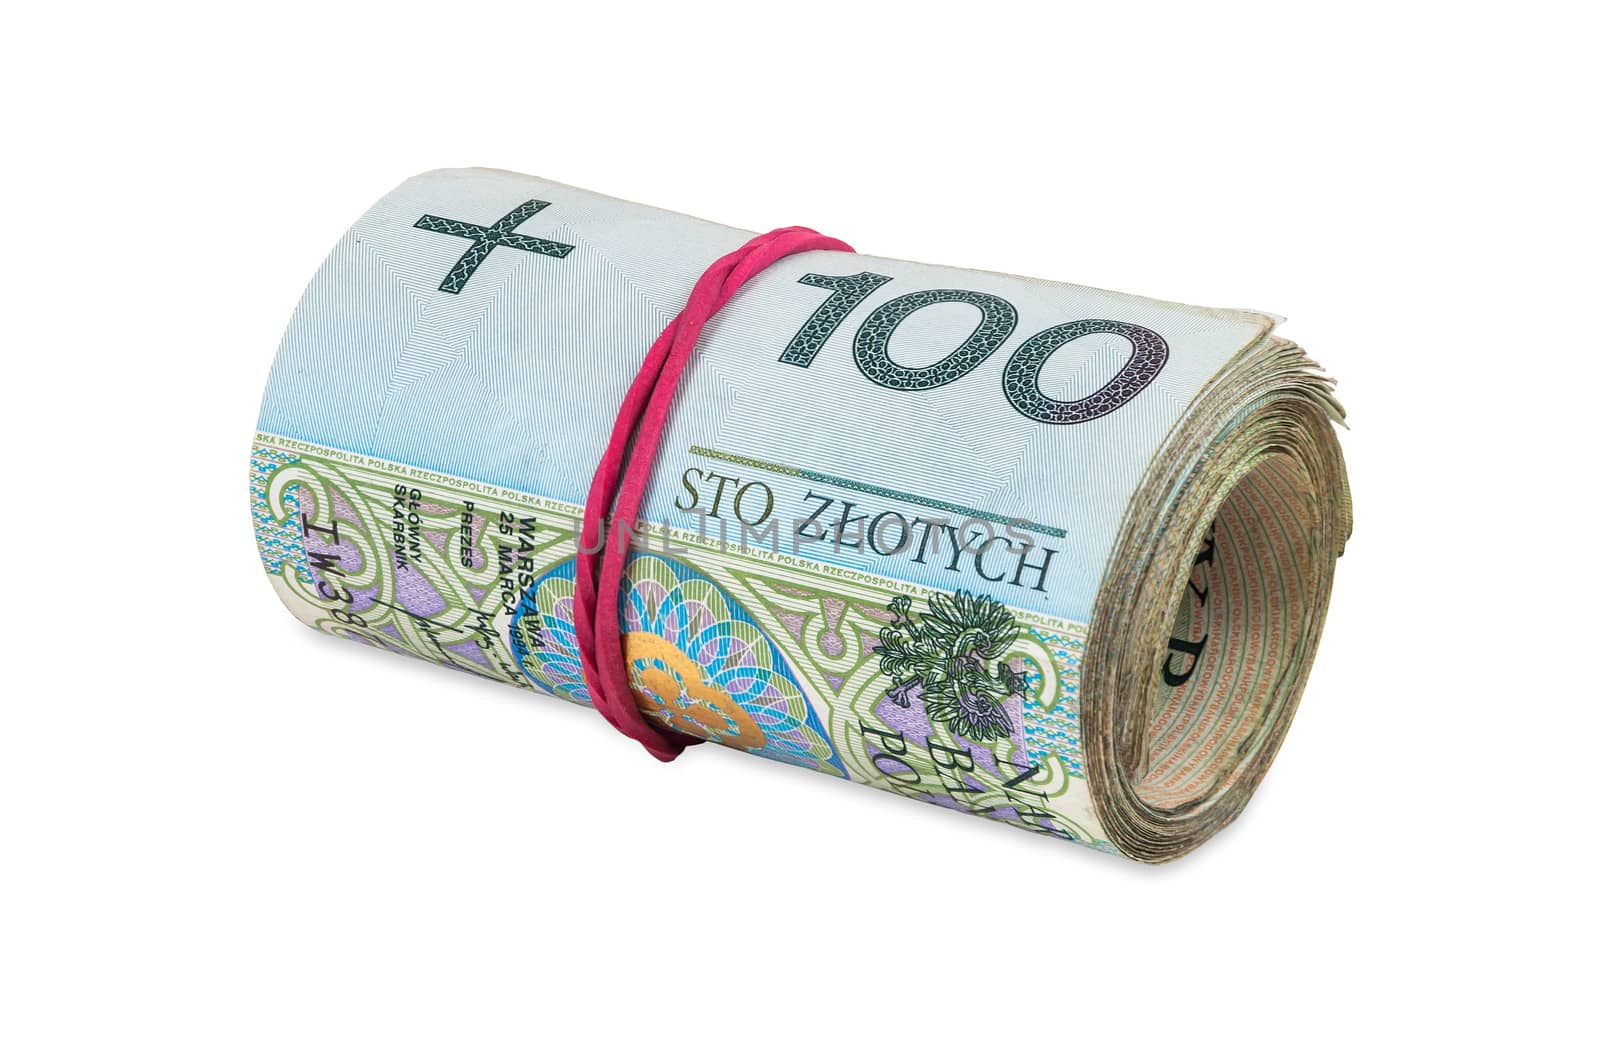 Polish banknotes of 100 PLN rolled with rubber by mkos83